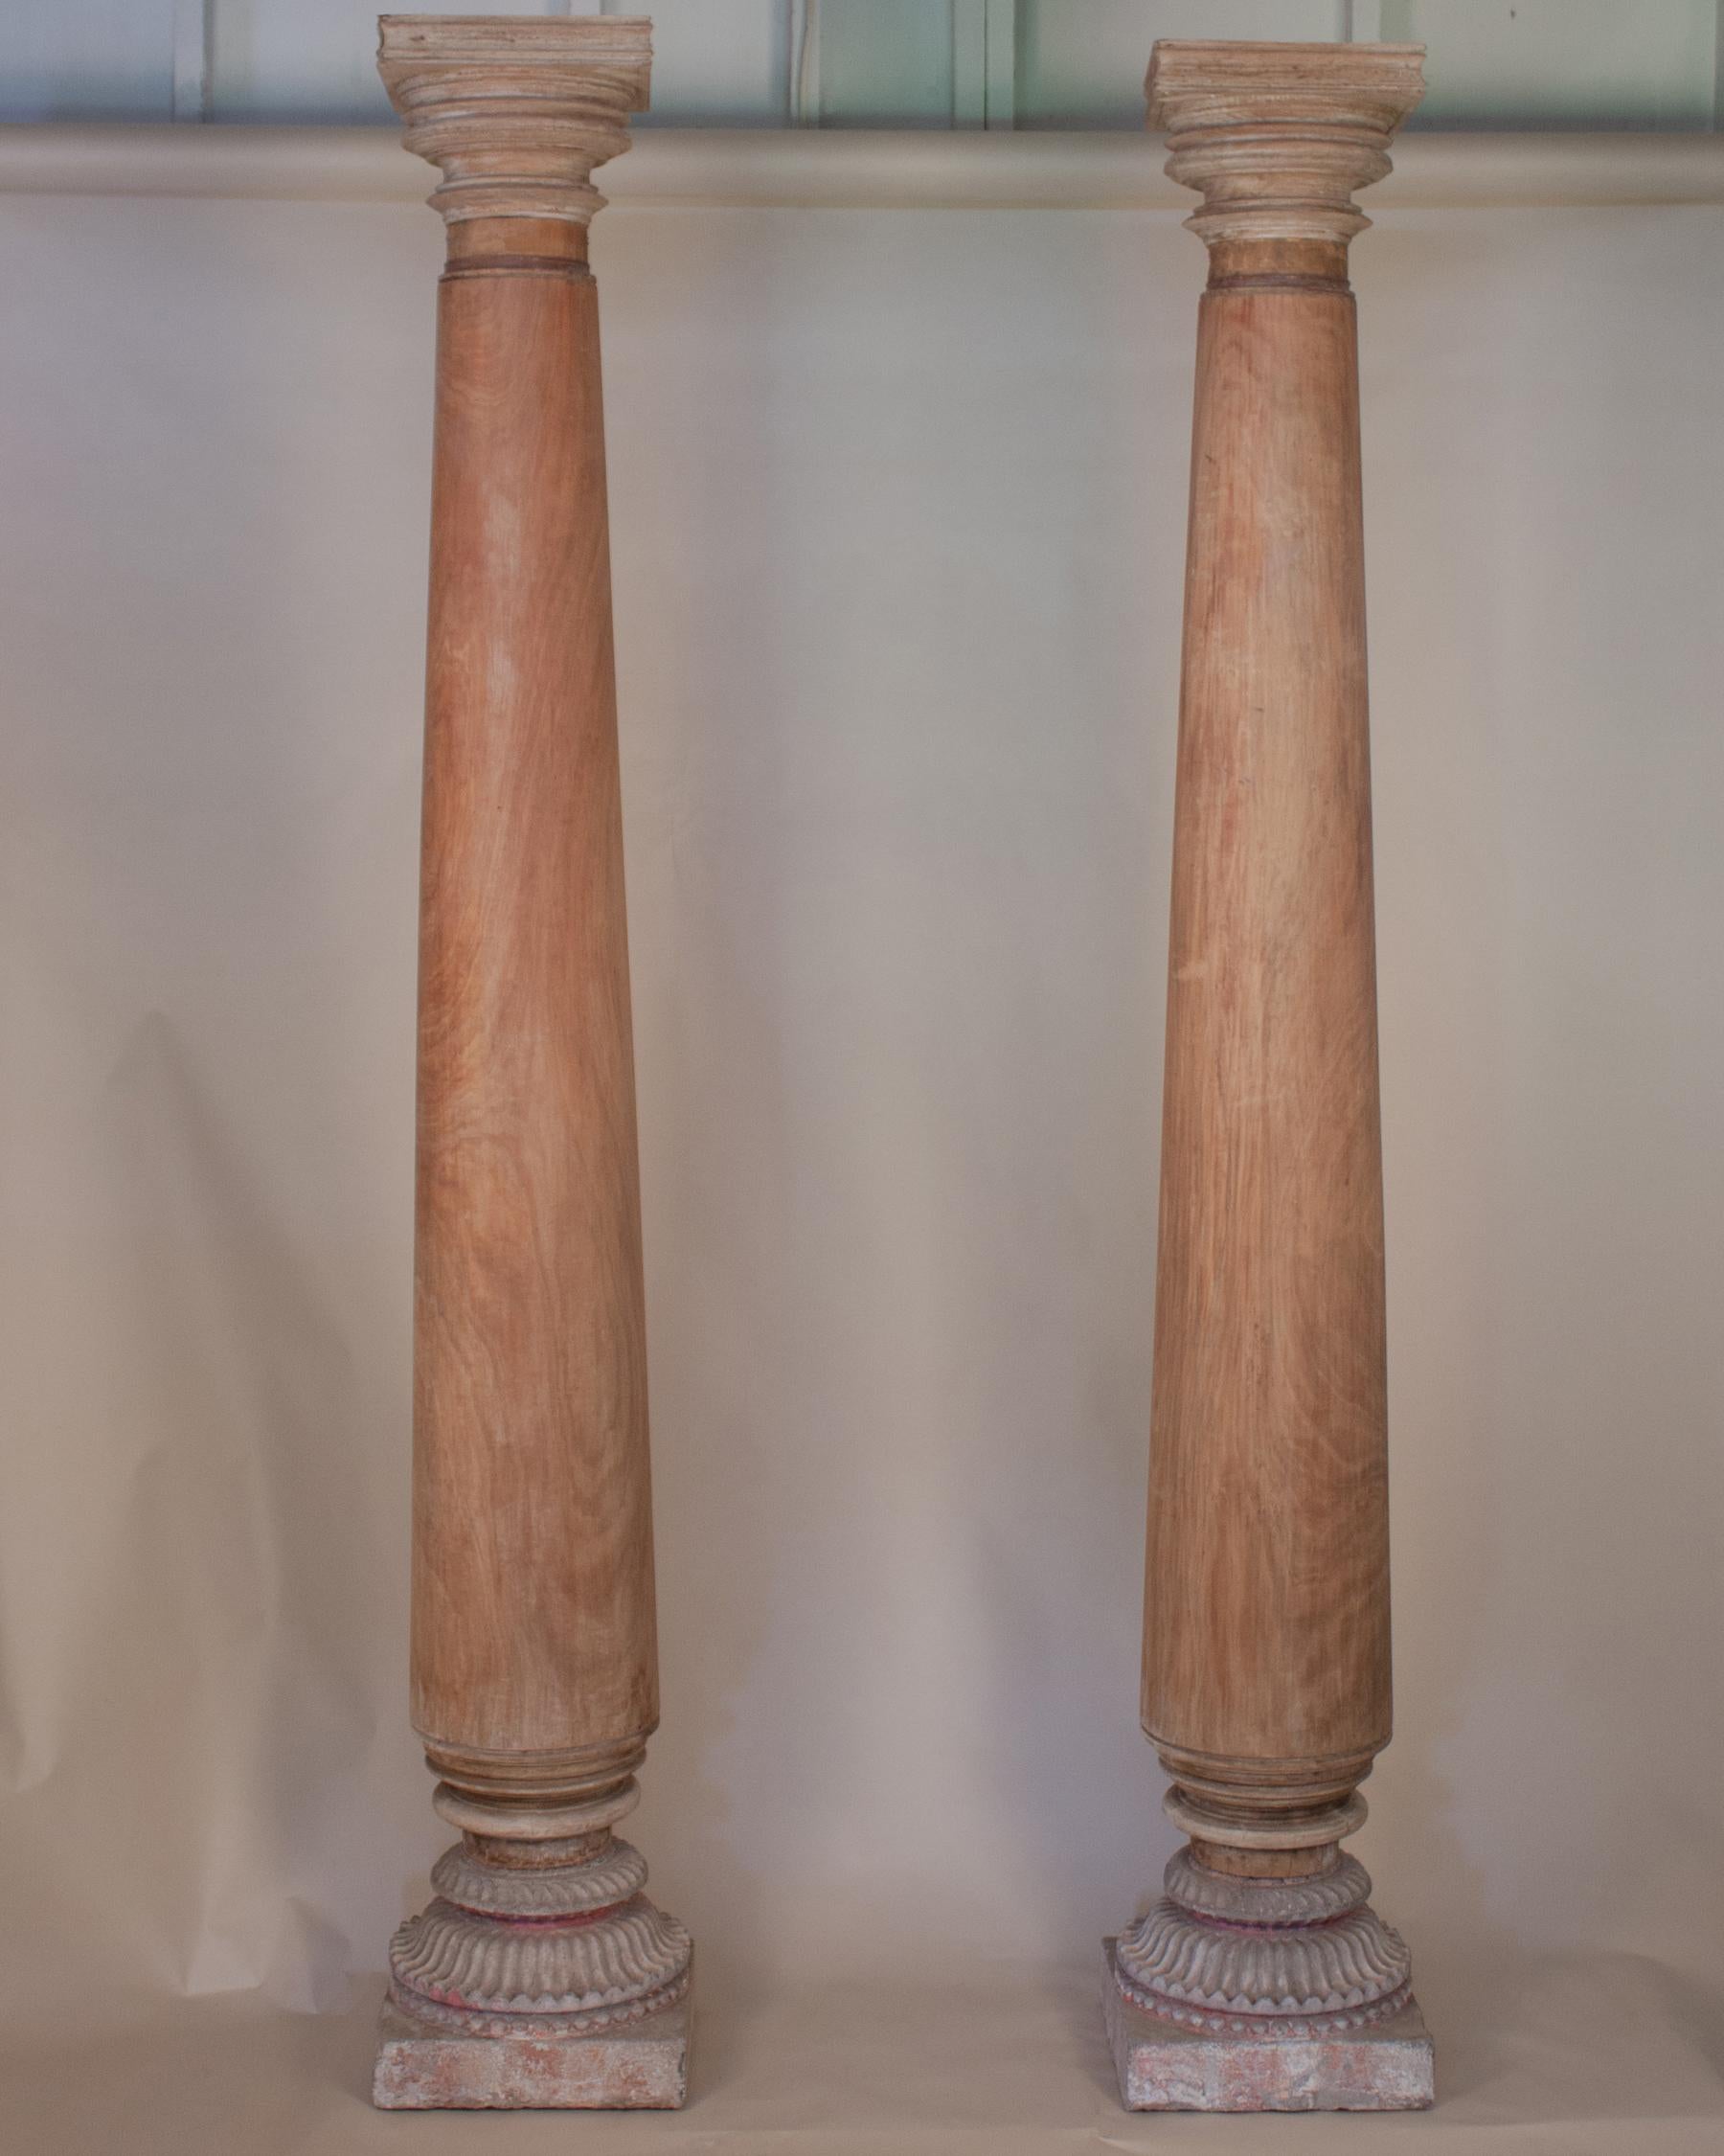 An impressive pair of late 19th century satinwood columns/pillars and capitals with stone bases from Portuguese Goa. The matte satinwood has a beautiful tone and grain, and the bases have retained traces of their original paint.
Overall Height: